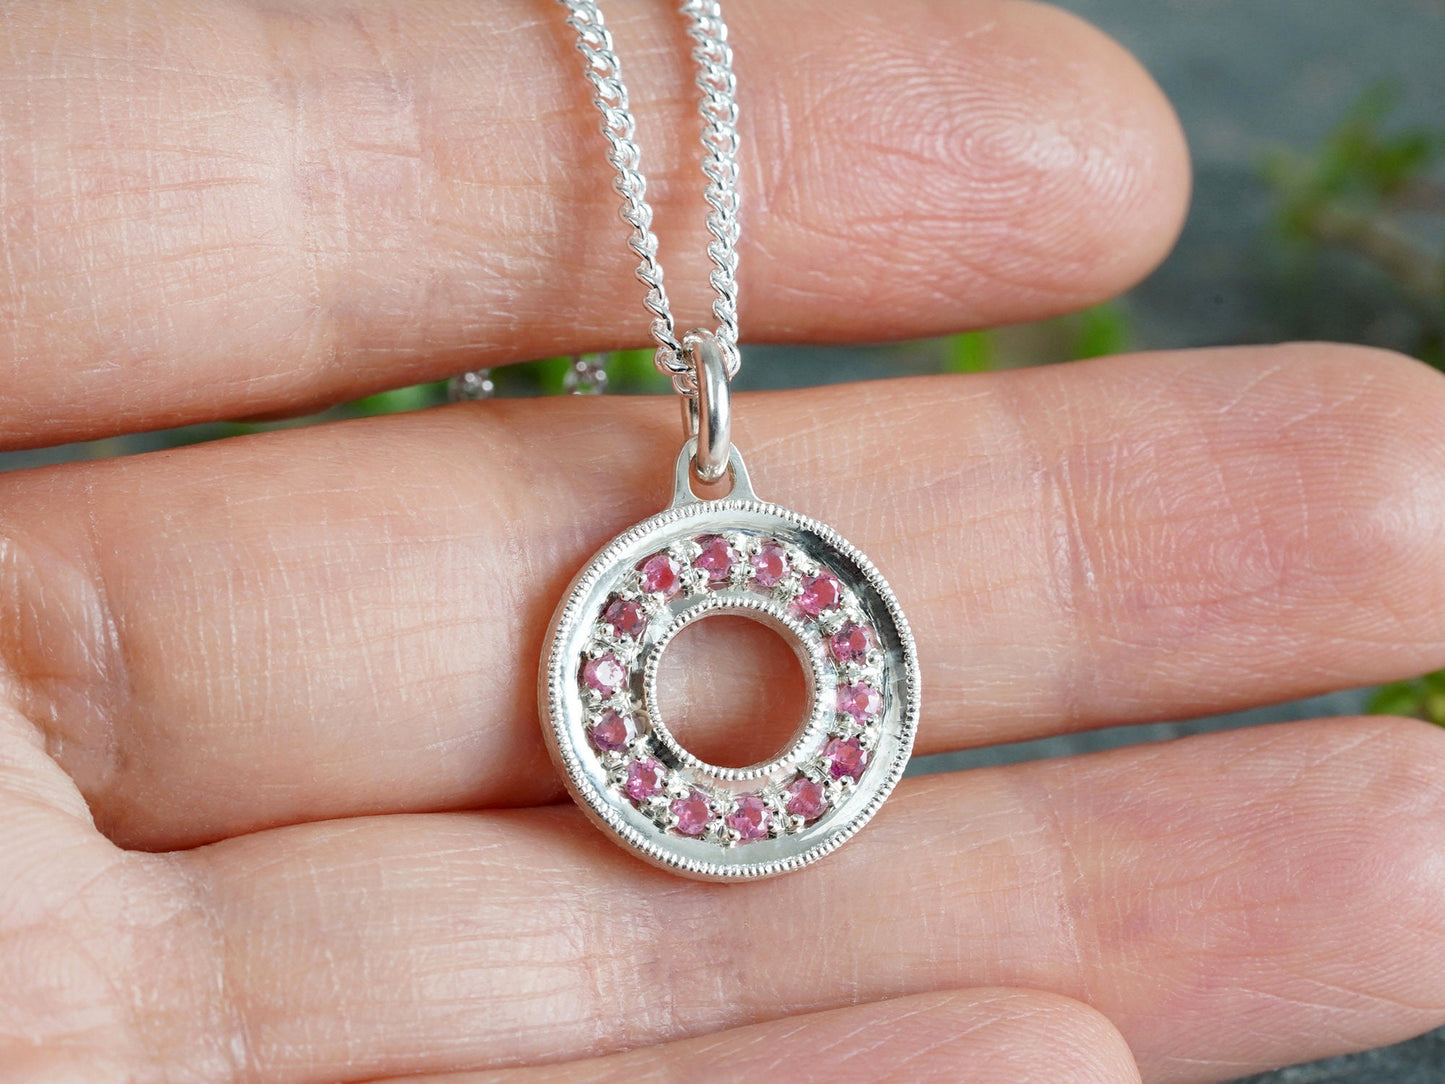 Eternity Tourmaline Necklace in Sterling Silver, Pink Tourmaline Necklace, Infinity Tourmaline Necklace